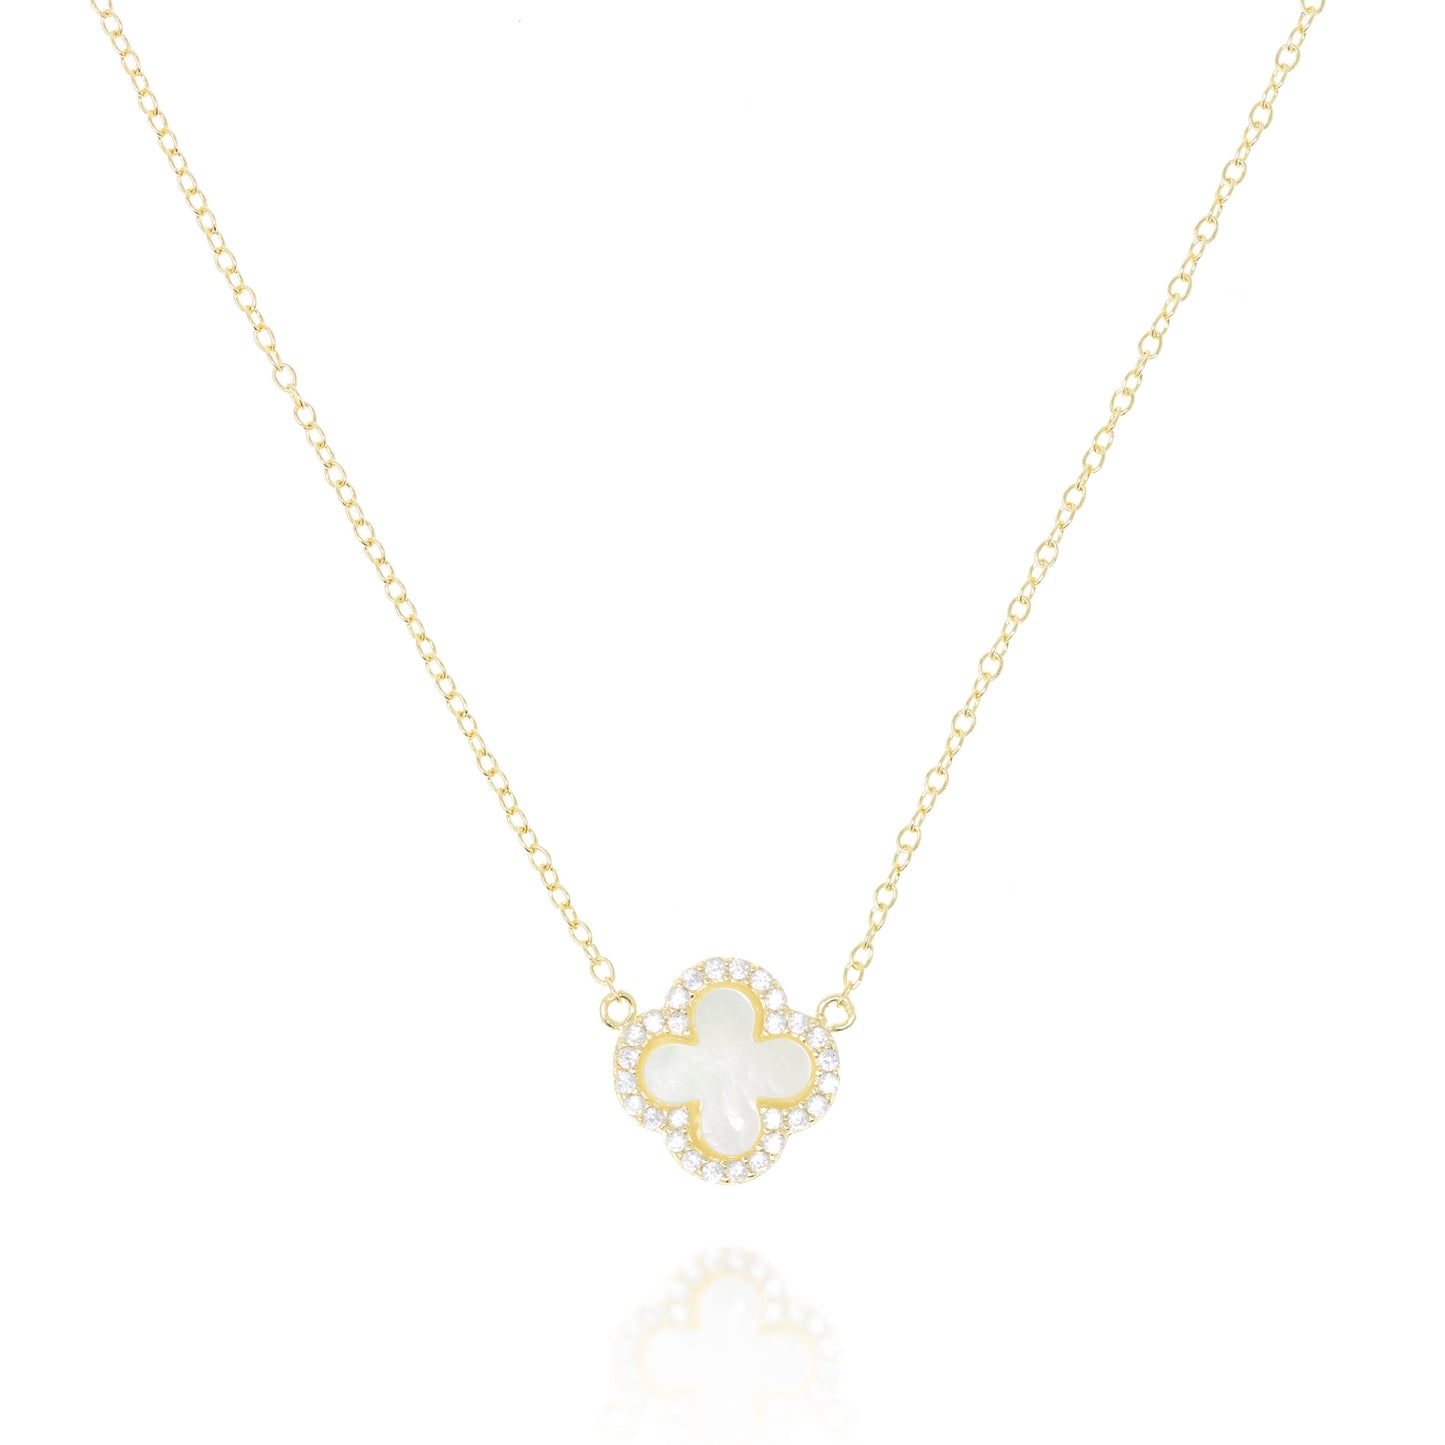 
Gold-plated sterling silver necklace with mother of pearl clover pendant rimmed with cubic zirconia

